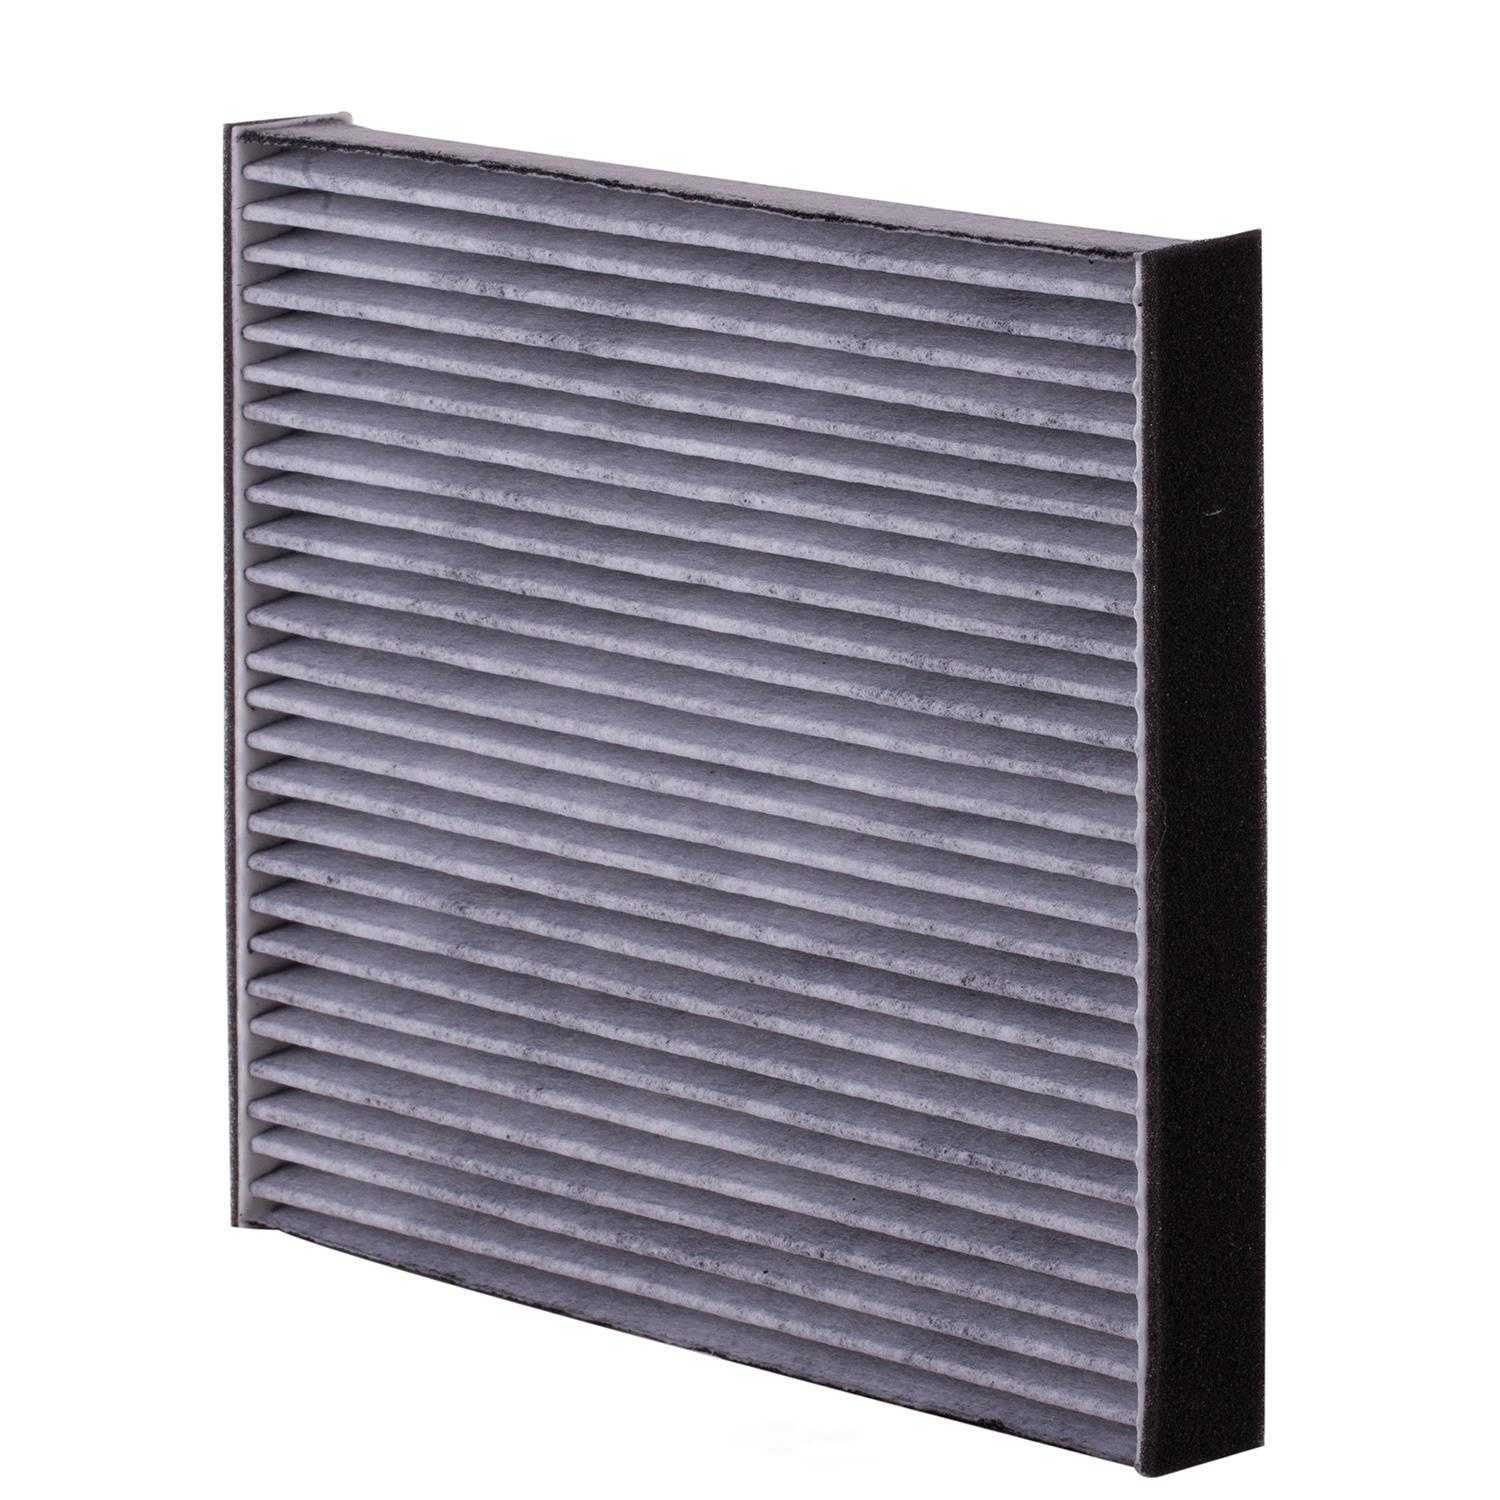 PARTS PLUS FILTERS BY PREMIUM GUARD - Charcoal Media - PLF CAF5518